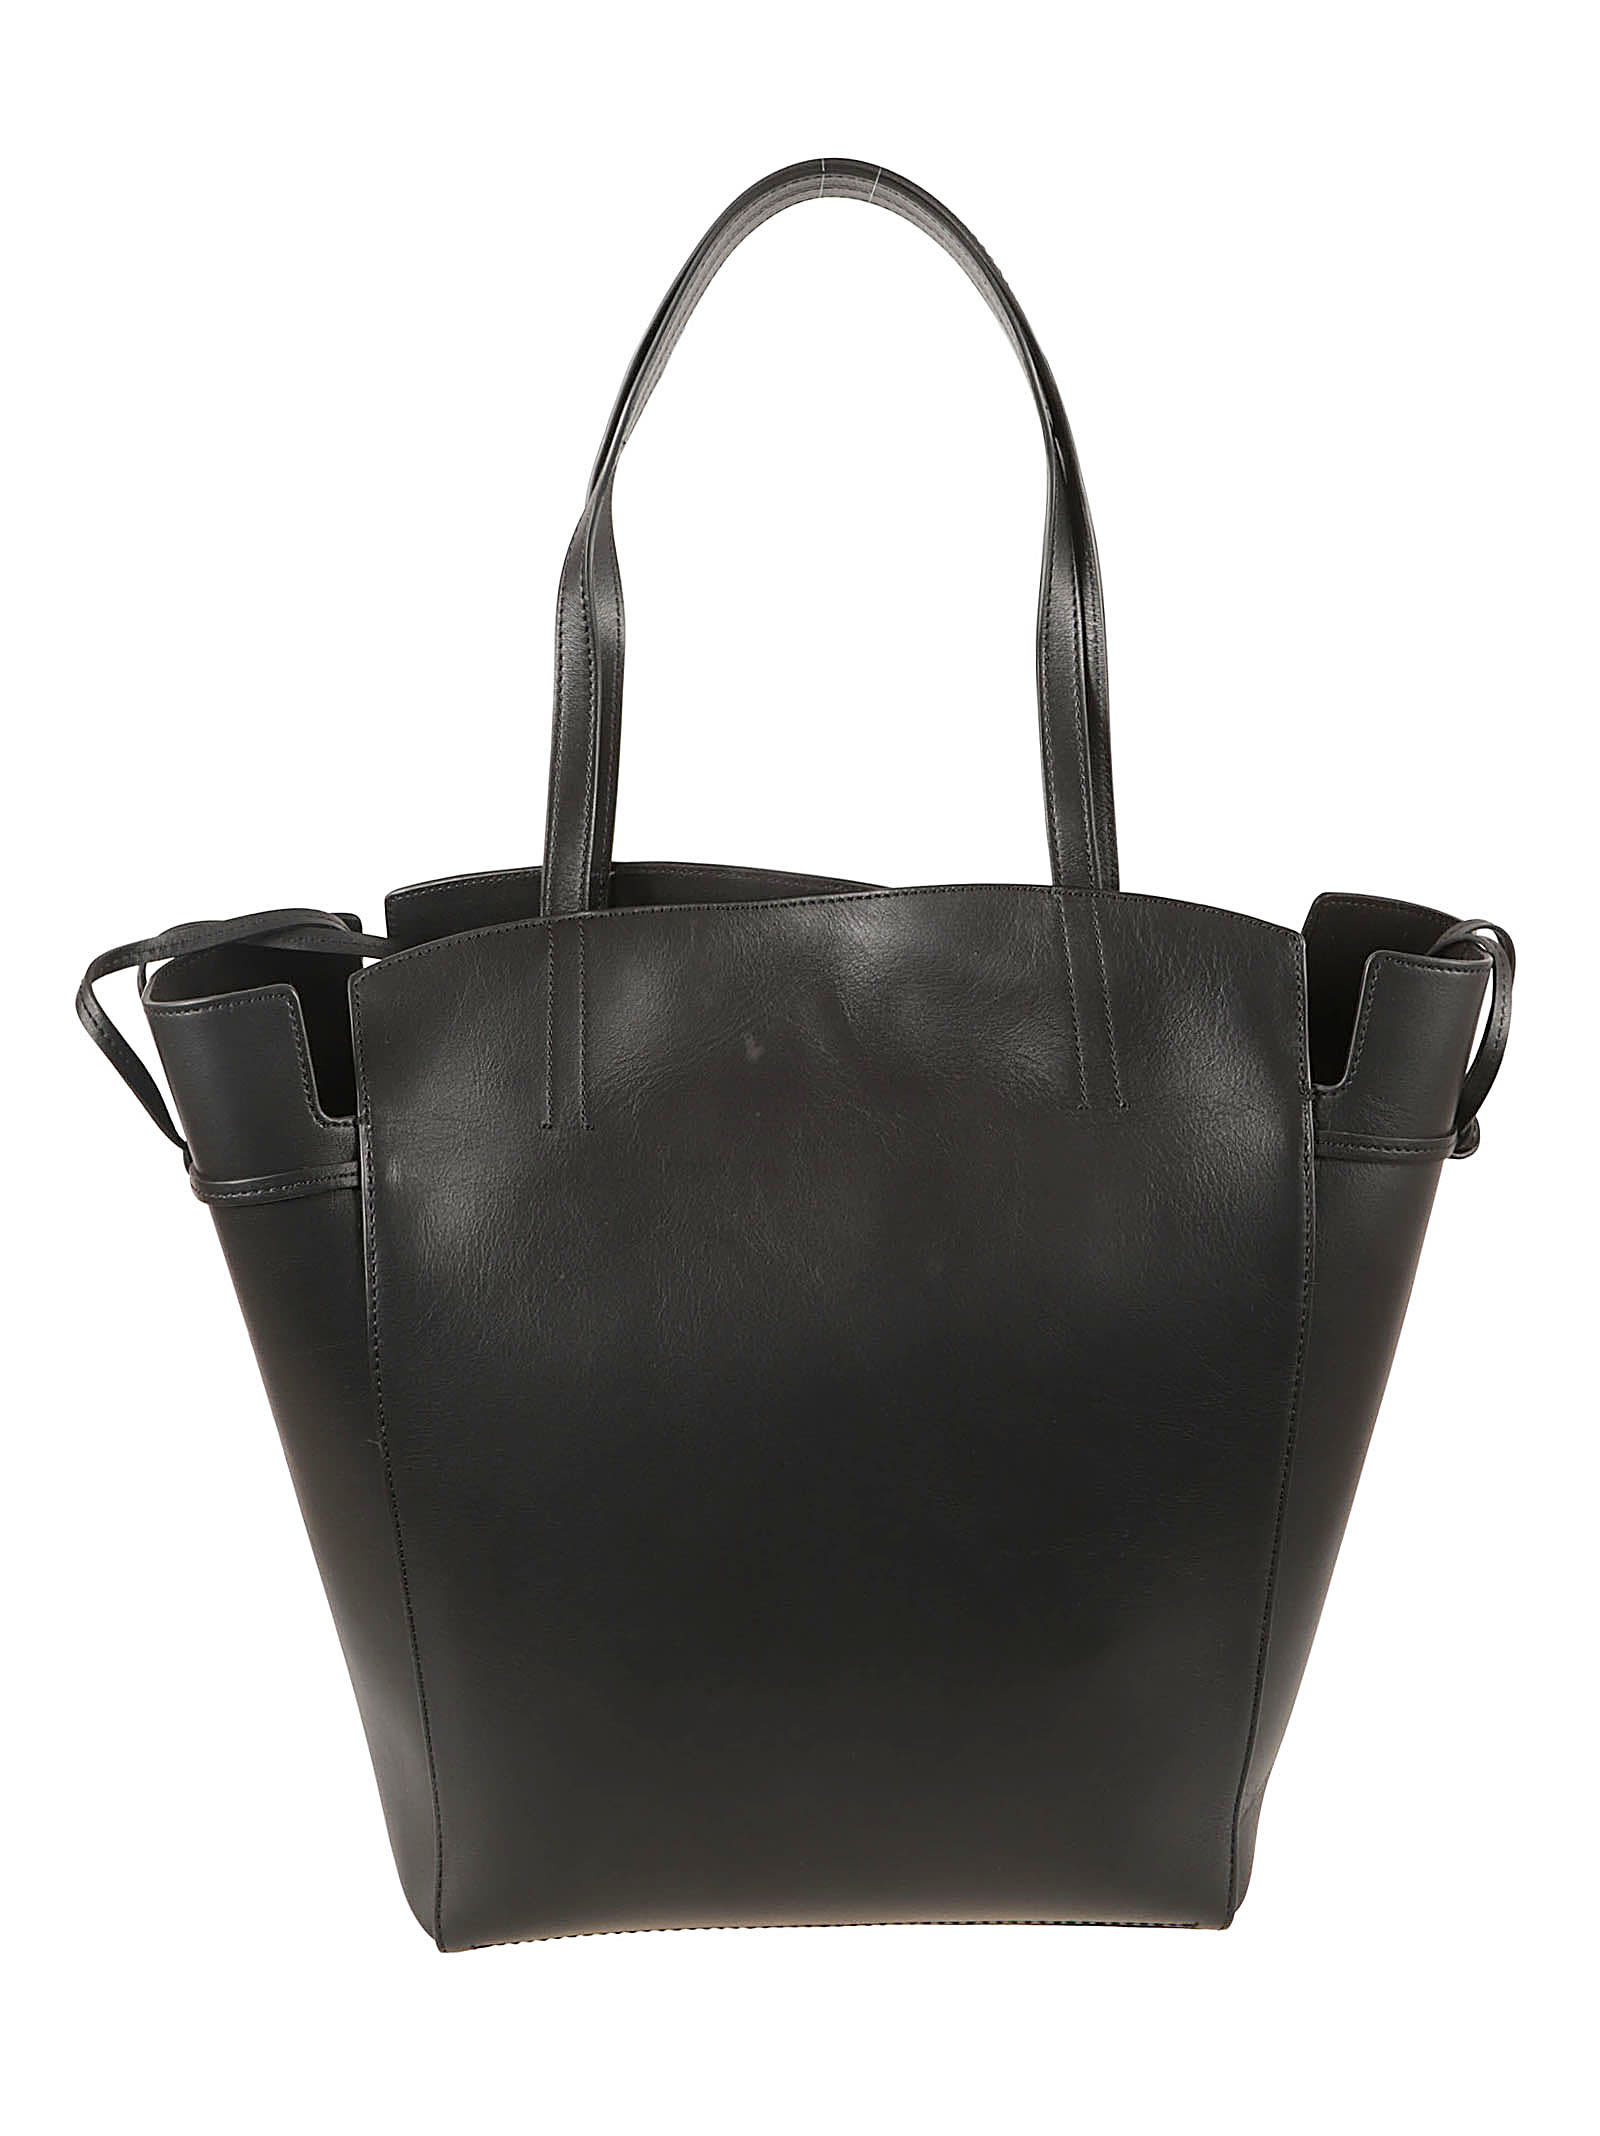 Mulberry Clovelly Tote In Black